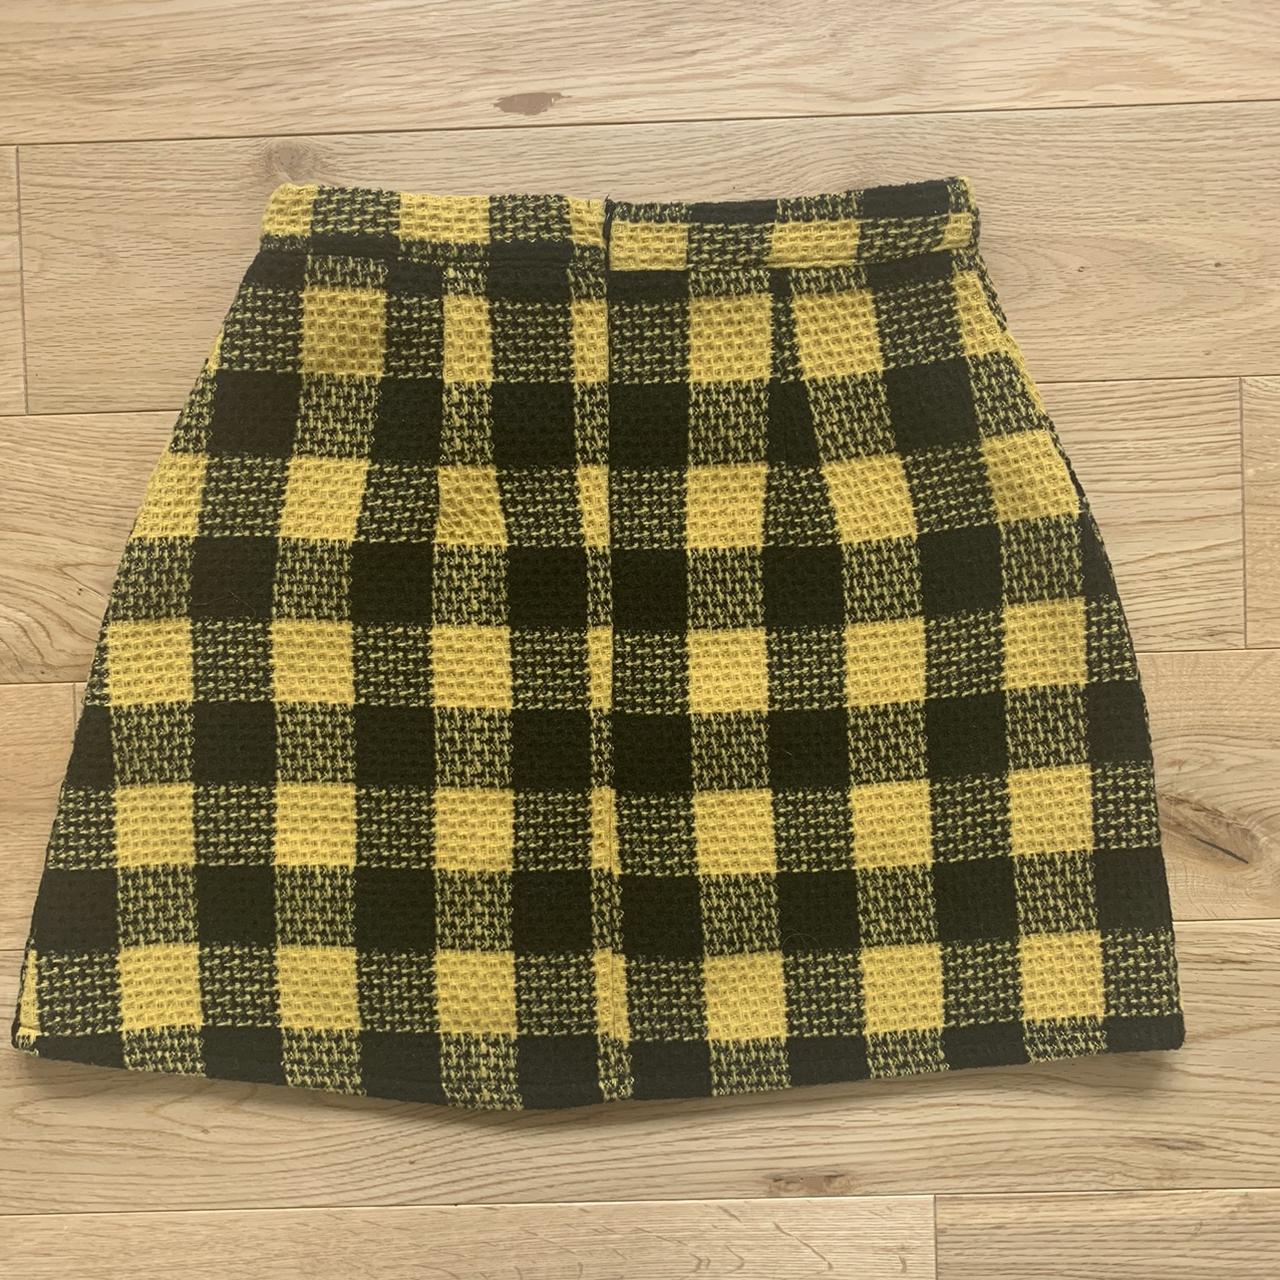 Missguided Women's Yellow and Black Skirt | Depop